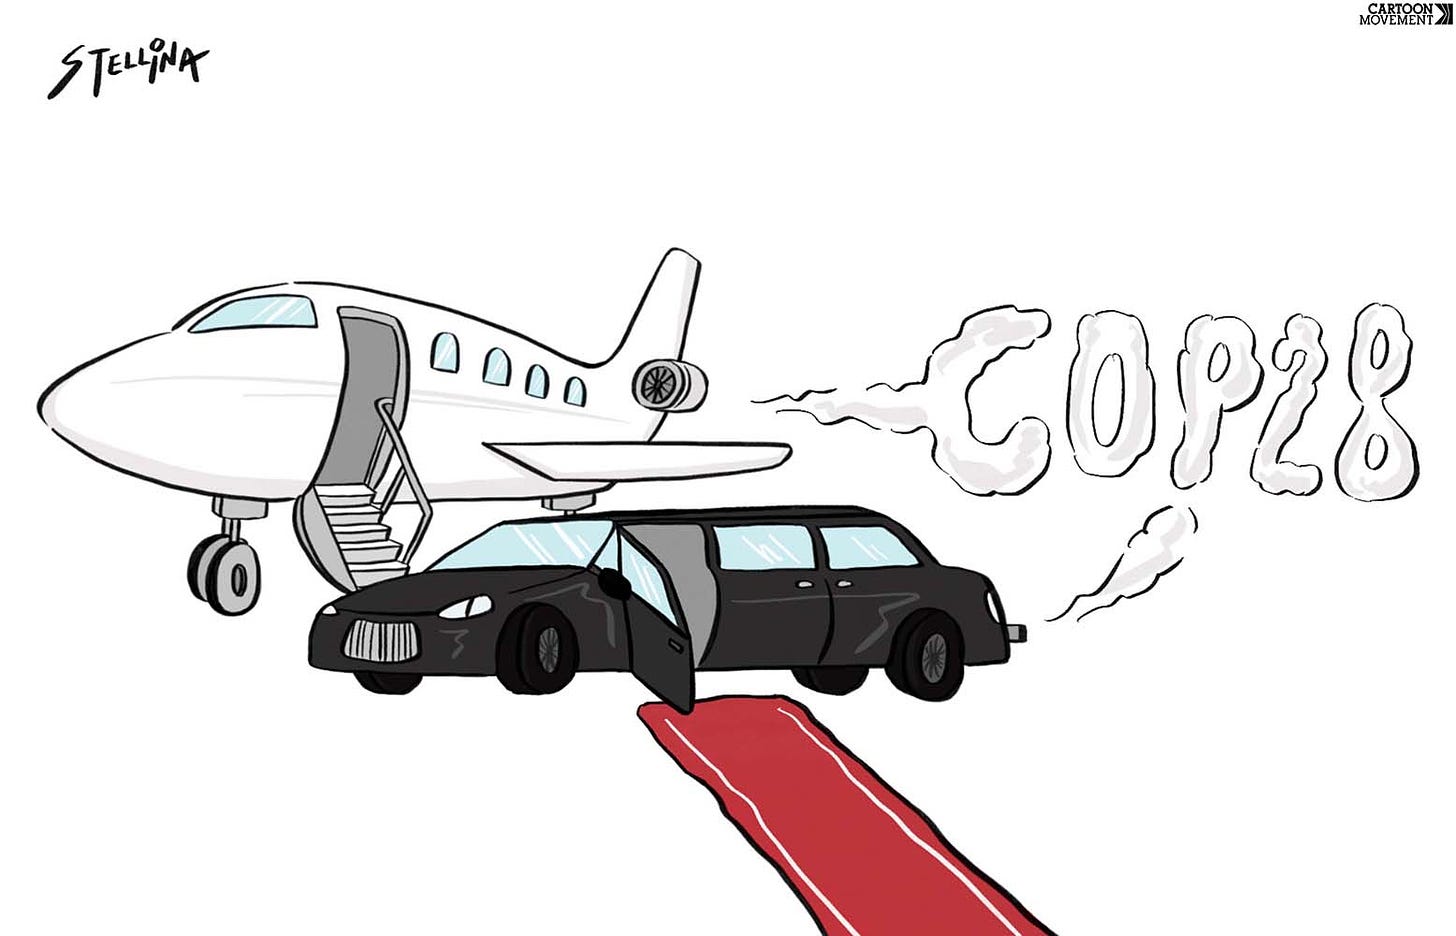 Cartoon showing a private jet with a red carpet from the airplane door to a waiting limousine. Both plane and car emit smoke from their exhausts that spells the word 'COP28'.